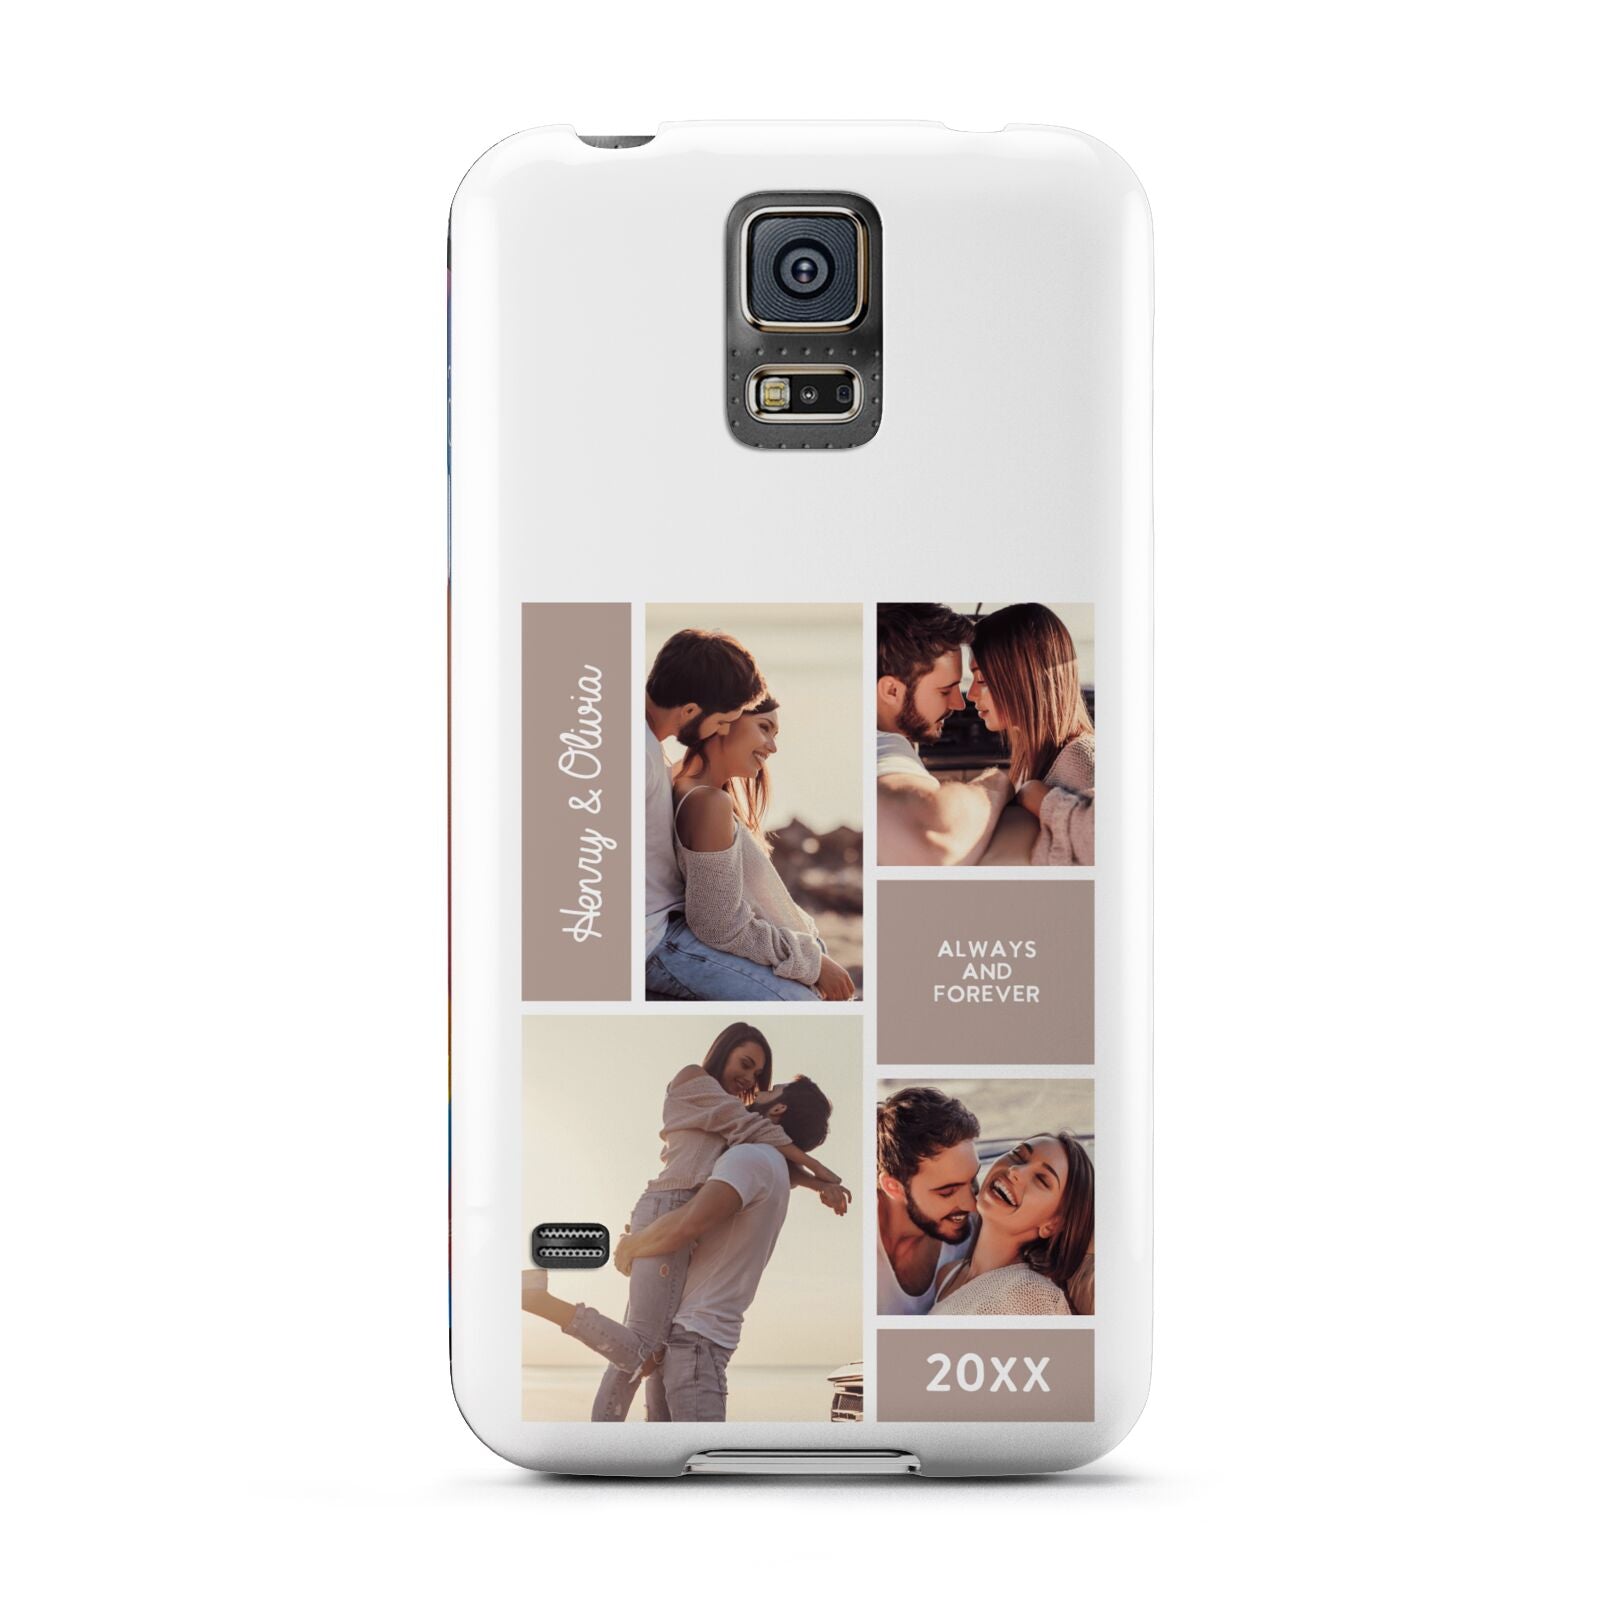 Couples Valentine Photo Collage Personalised Samsung Galaxy S5 Case